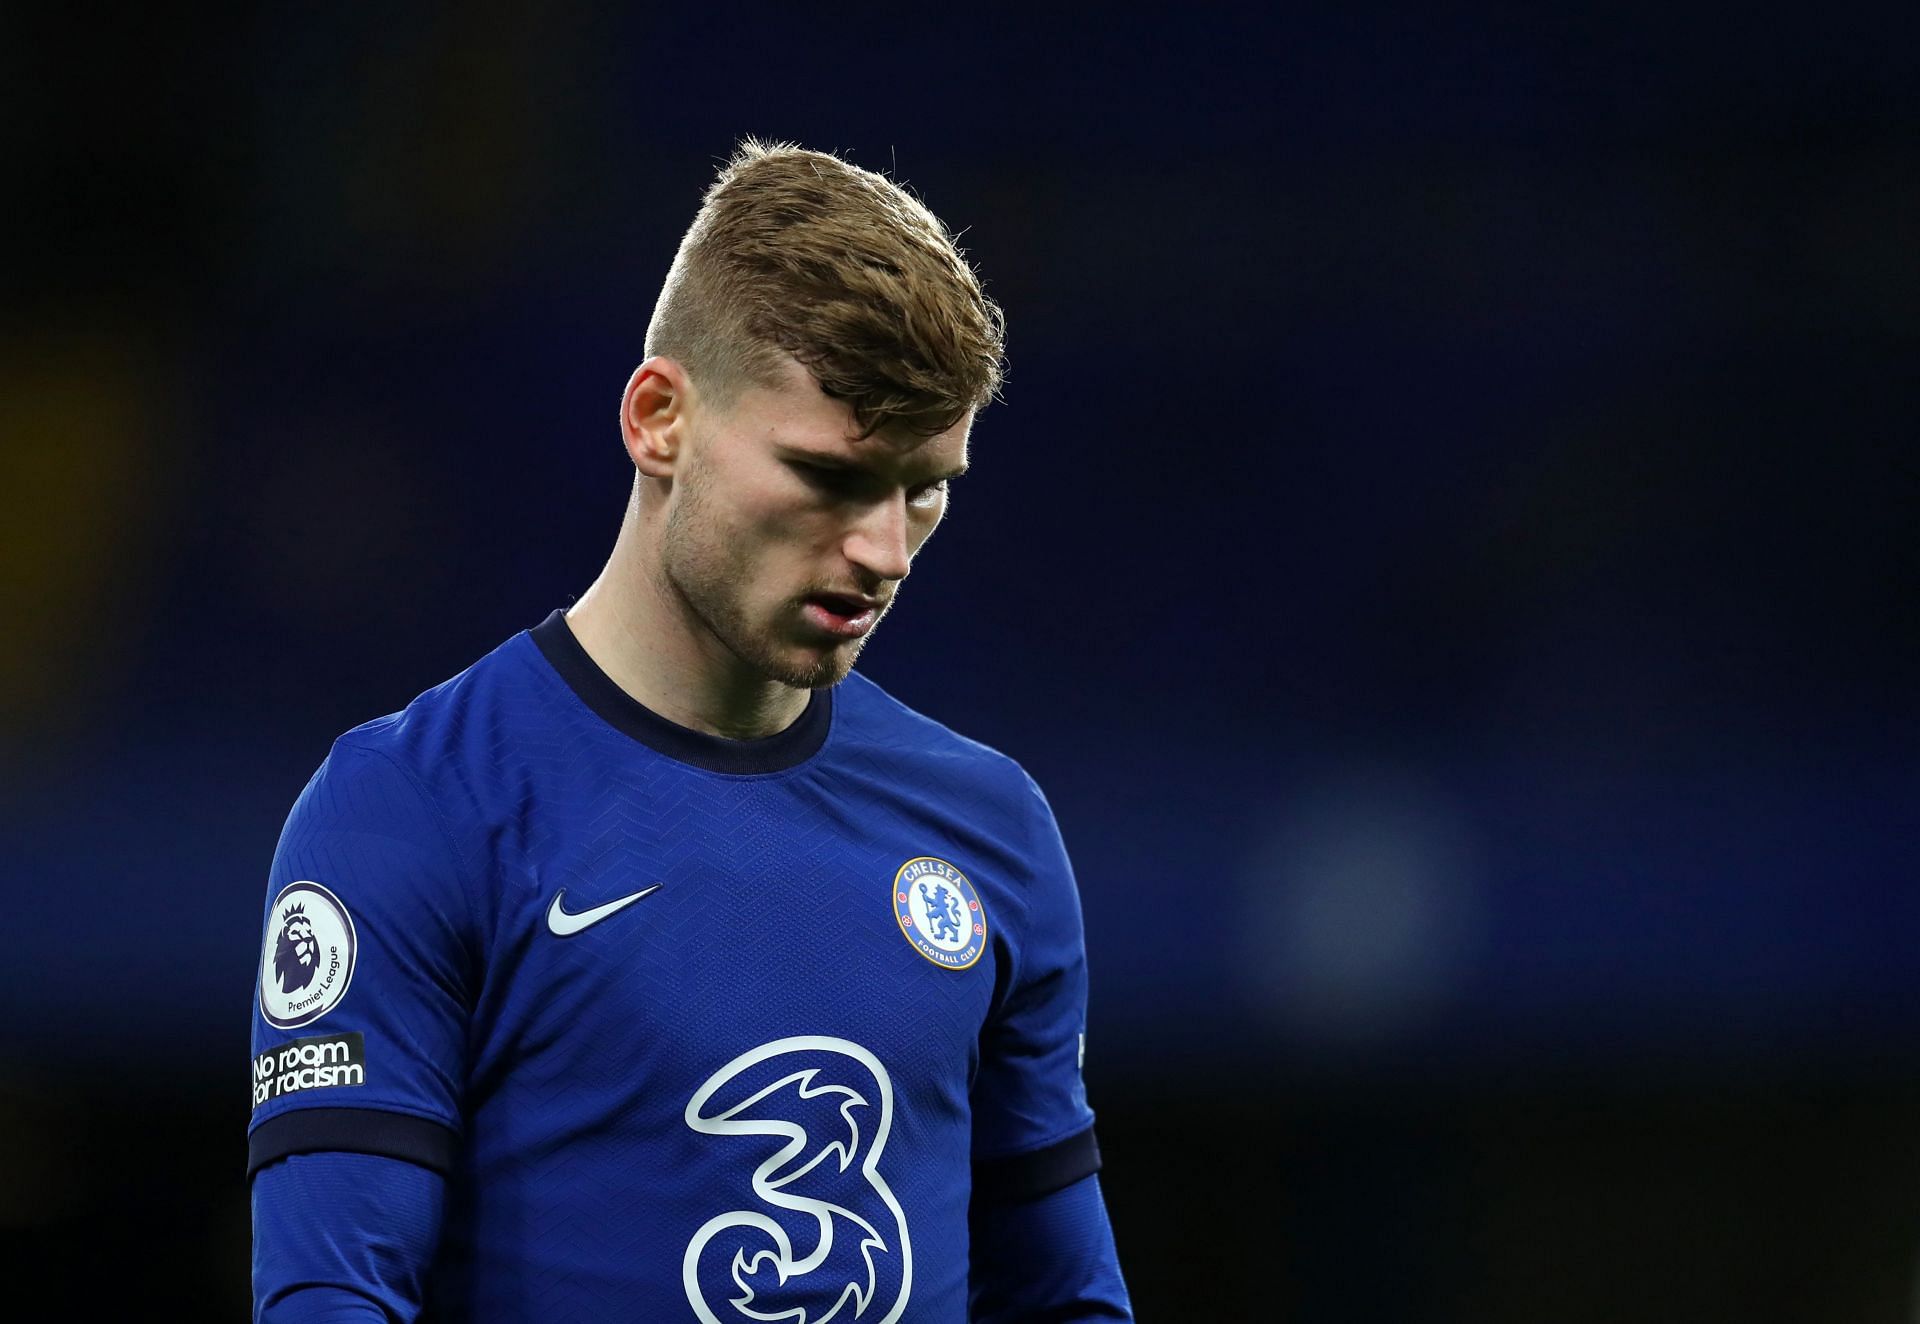 Timo Werner is expected to leave Chelsea this summer